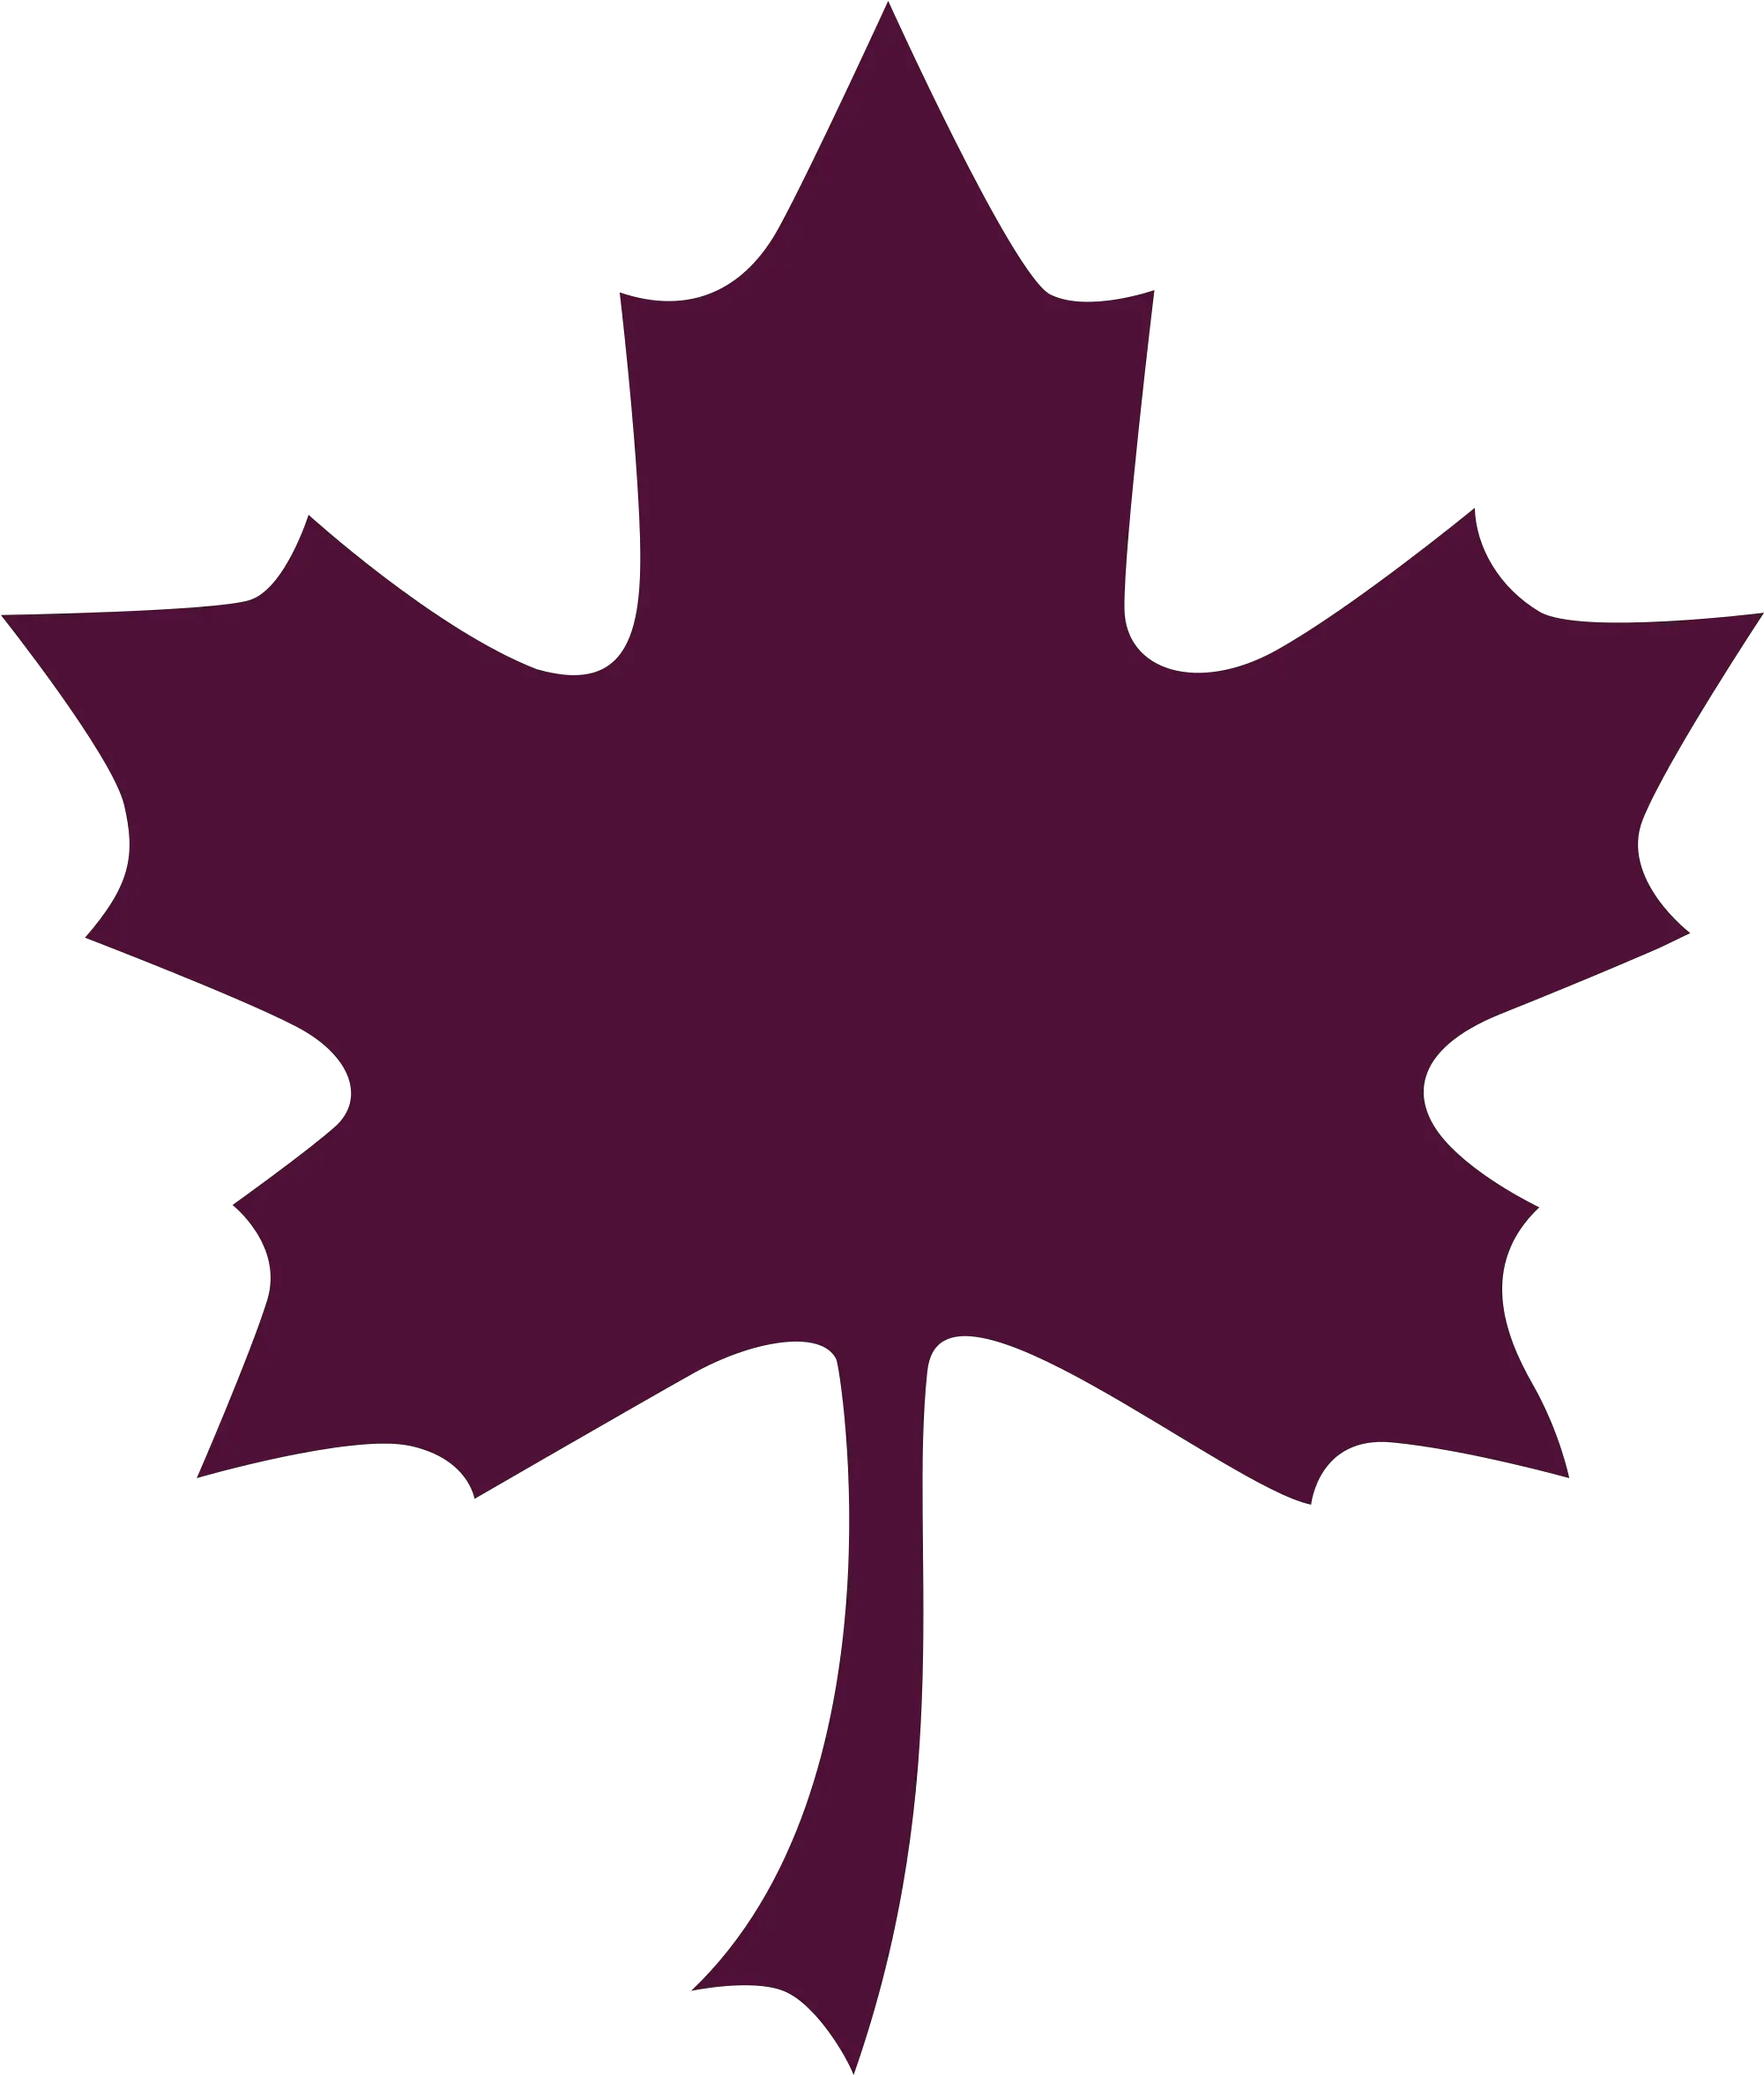 Download Maple Leaf Clipart Purple Air Canada Vacation Air Canada Centre Logo Png Canada Leaf Png